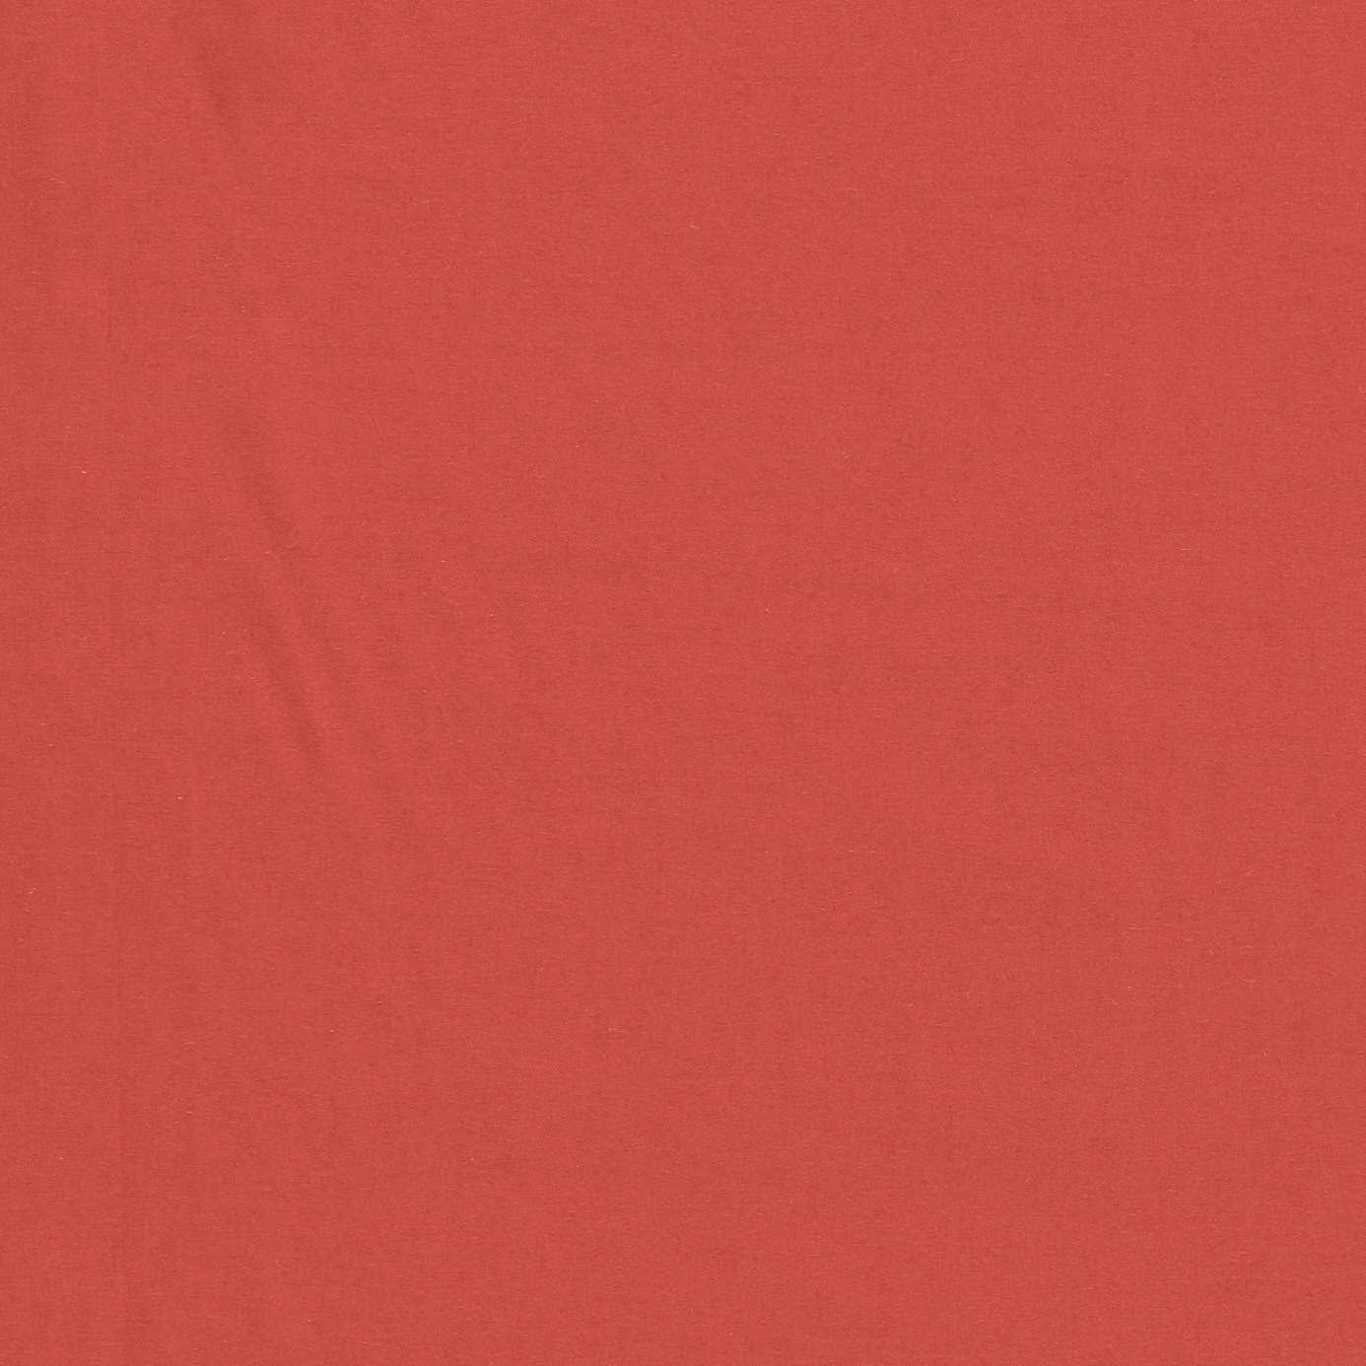 Empower Plain Fabric by Harlequin - HMOC133594 - Coral